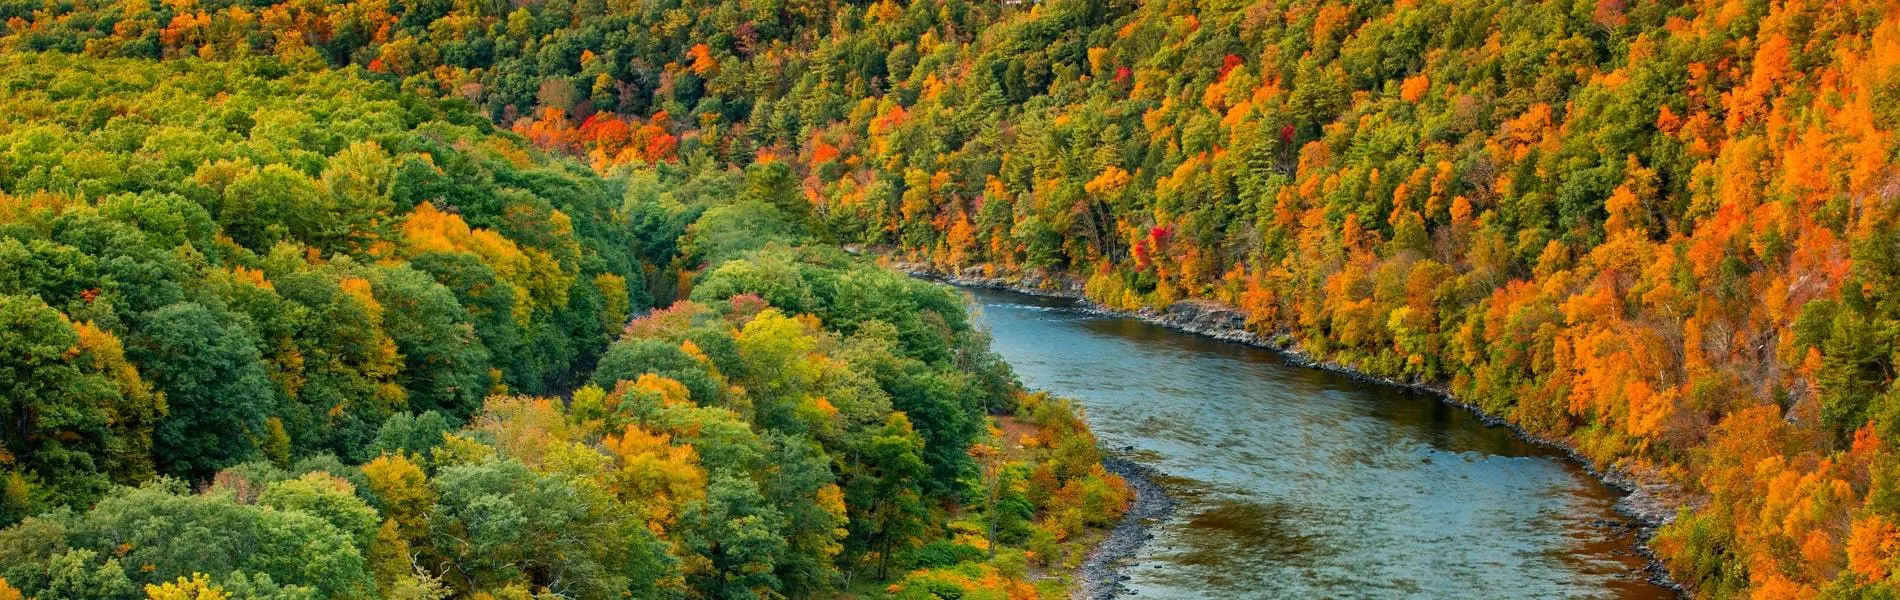 Views of Delaware River in autumn, New Castle County